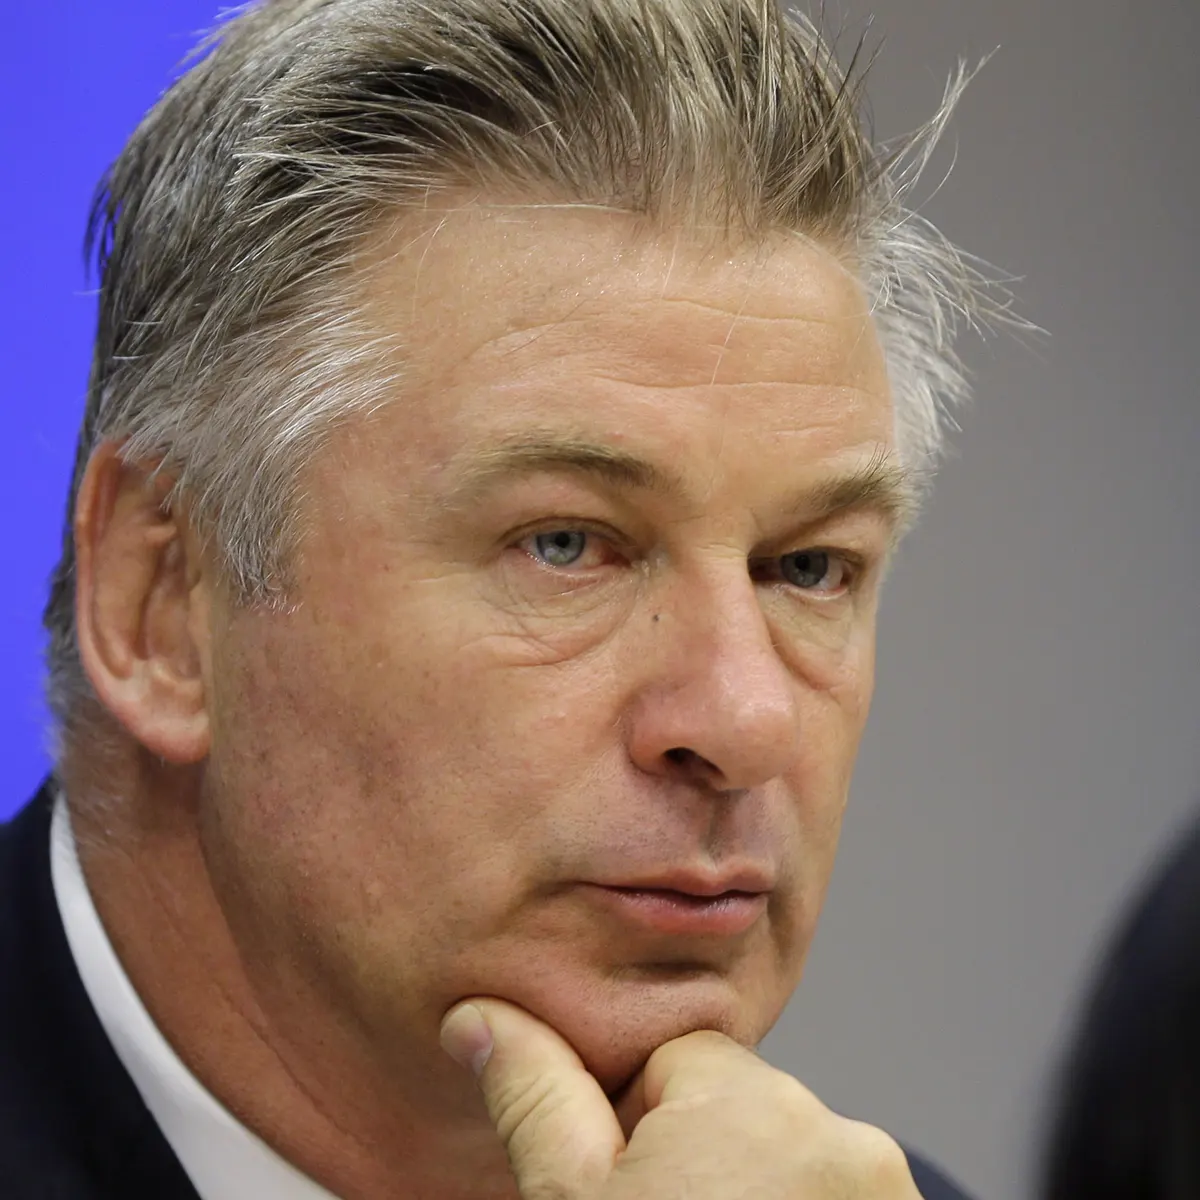 Alec Baldwin Faces New Manslaughter Charges